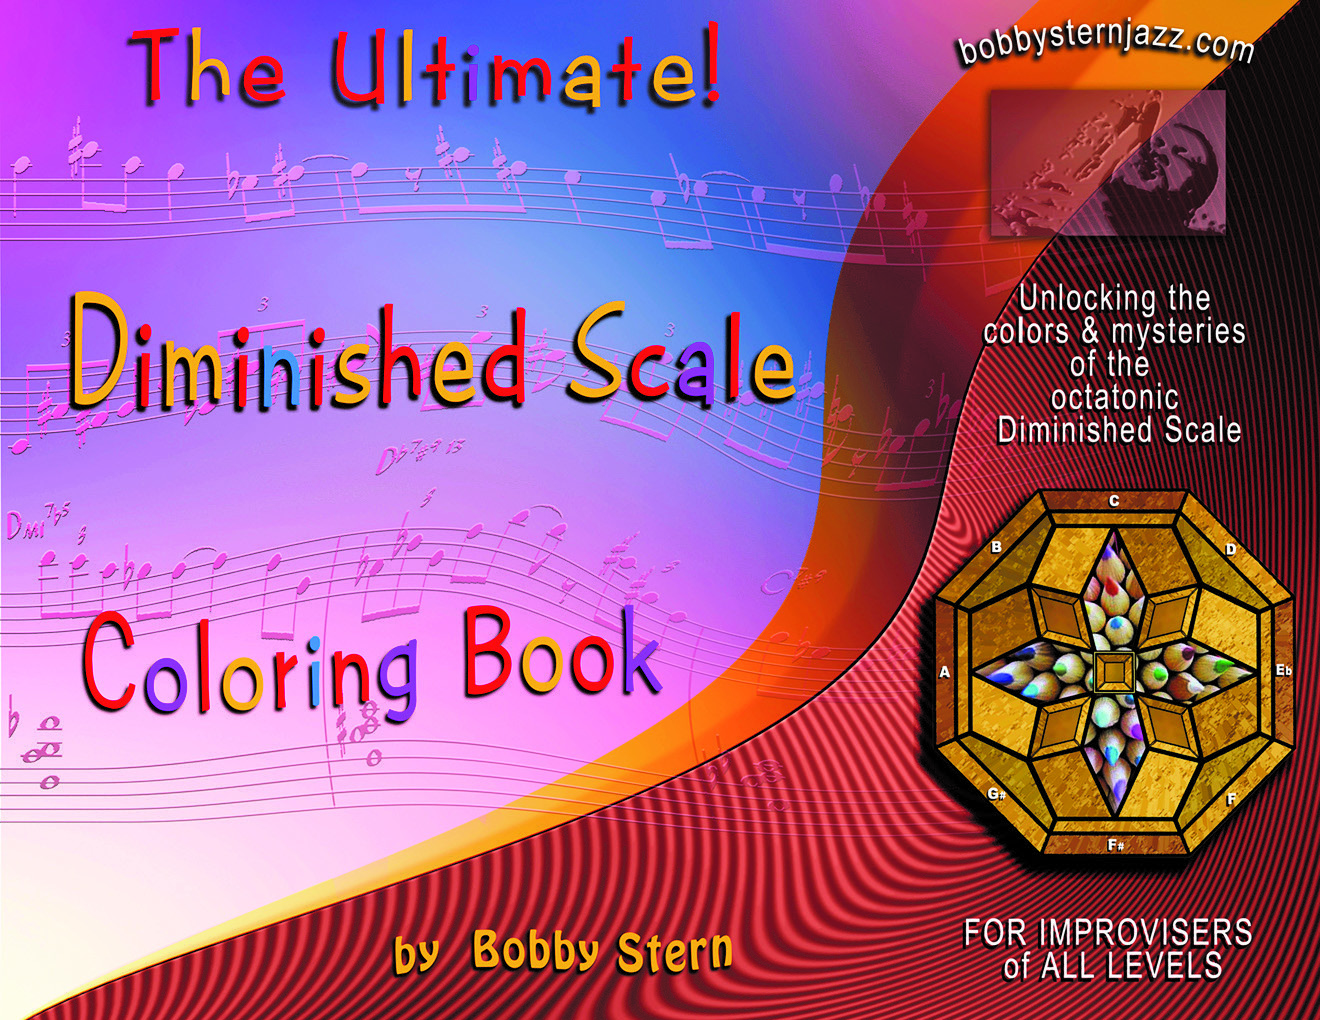 The Ultimate! Diminished Scale Coloring Book